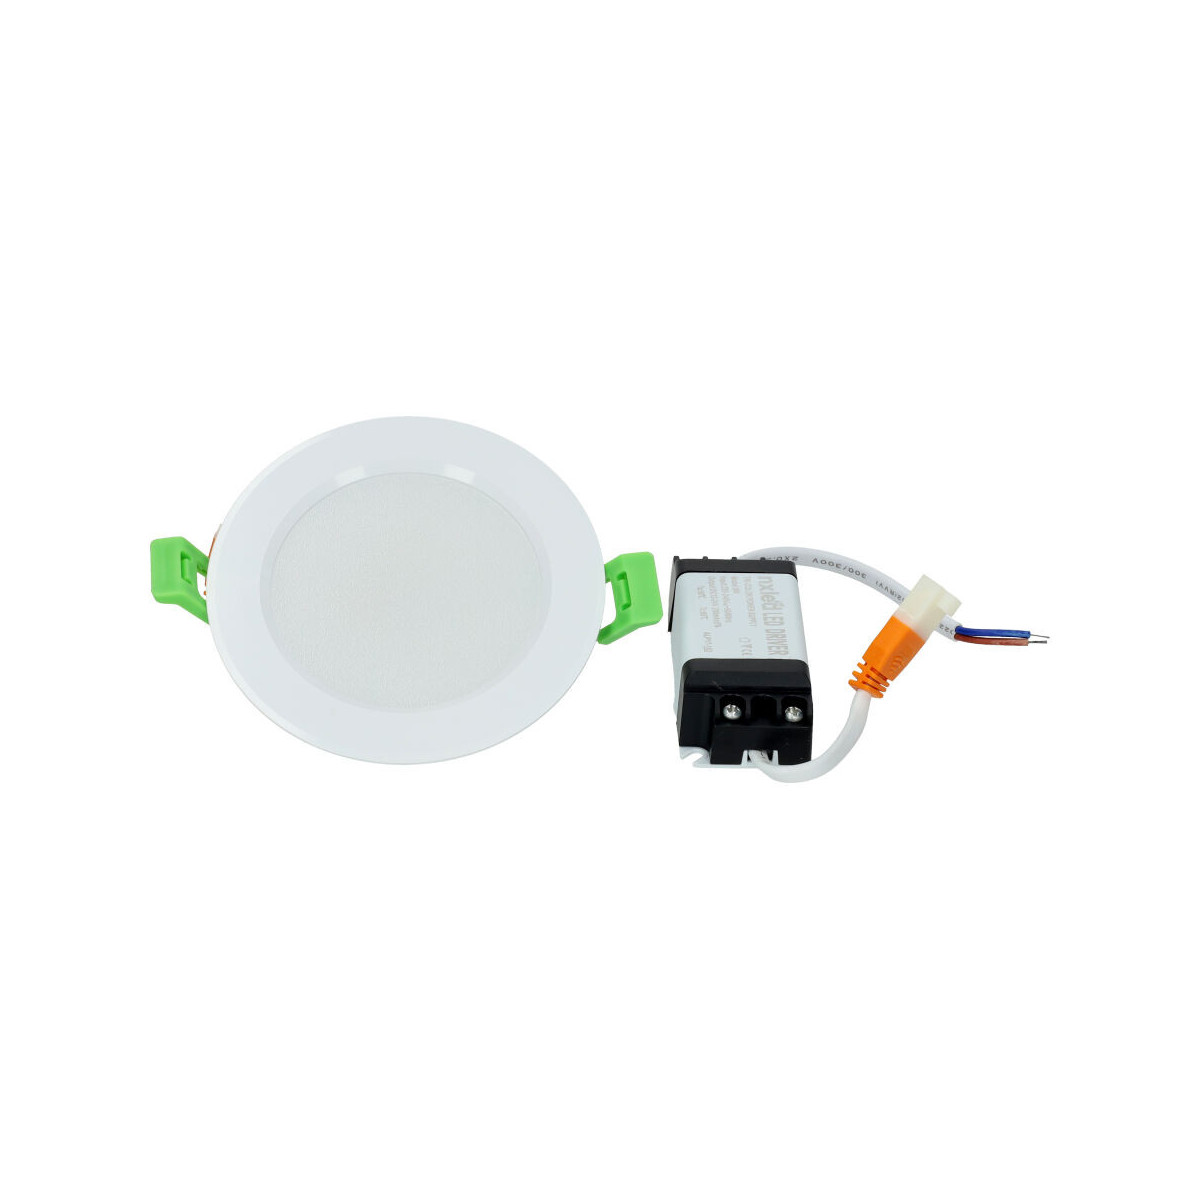 LED Downlight 5W tricolor